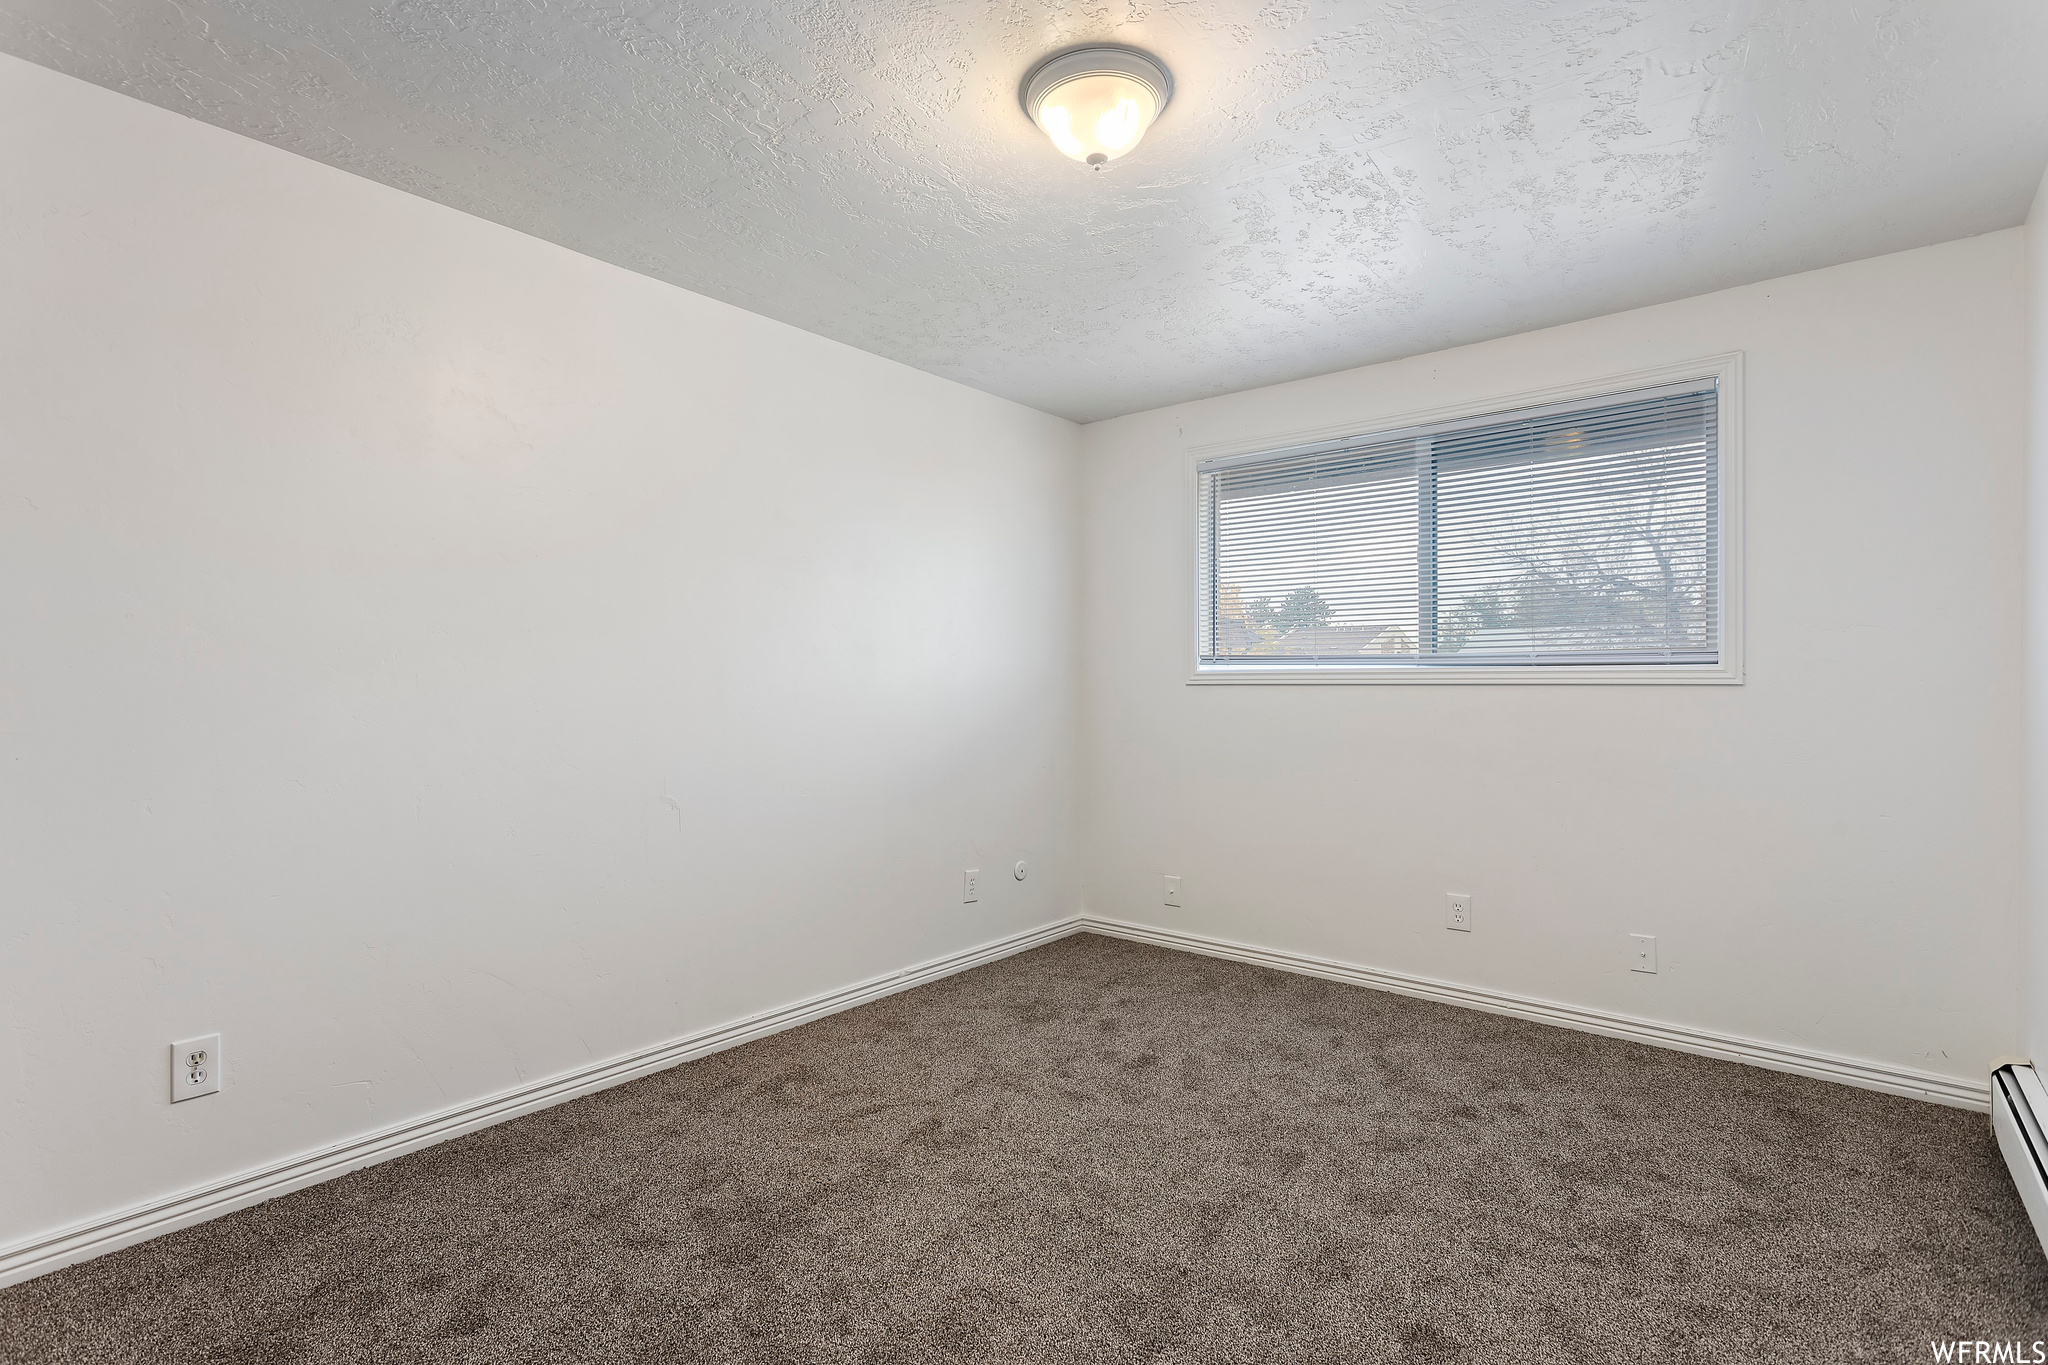 Spare room with dark colored carpet, a textured ceiling, and a baseboard heating unit